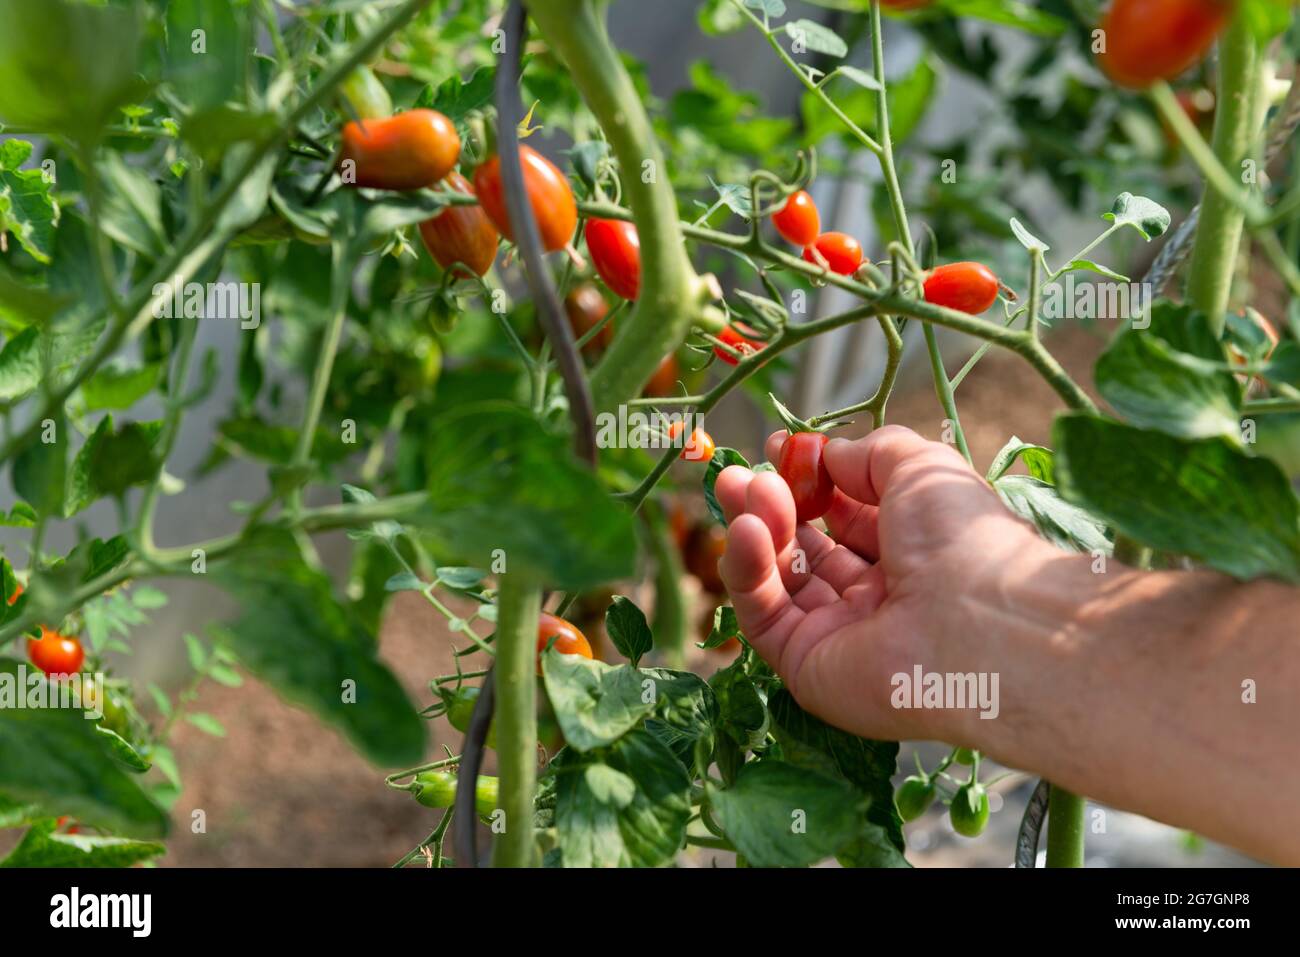 Hand of a man gathering red cherry tomato in a tight Stock Photo